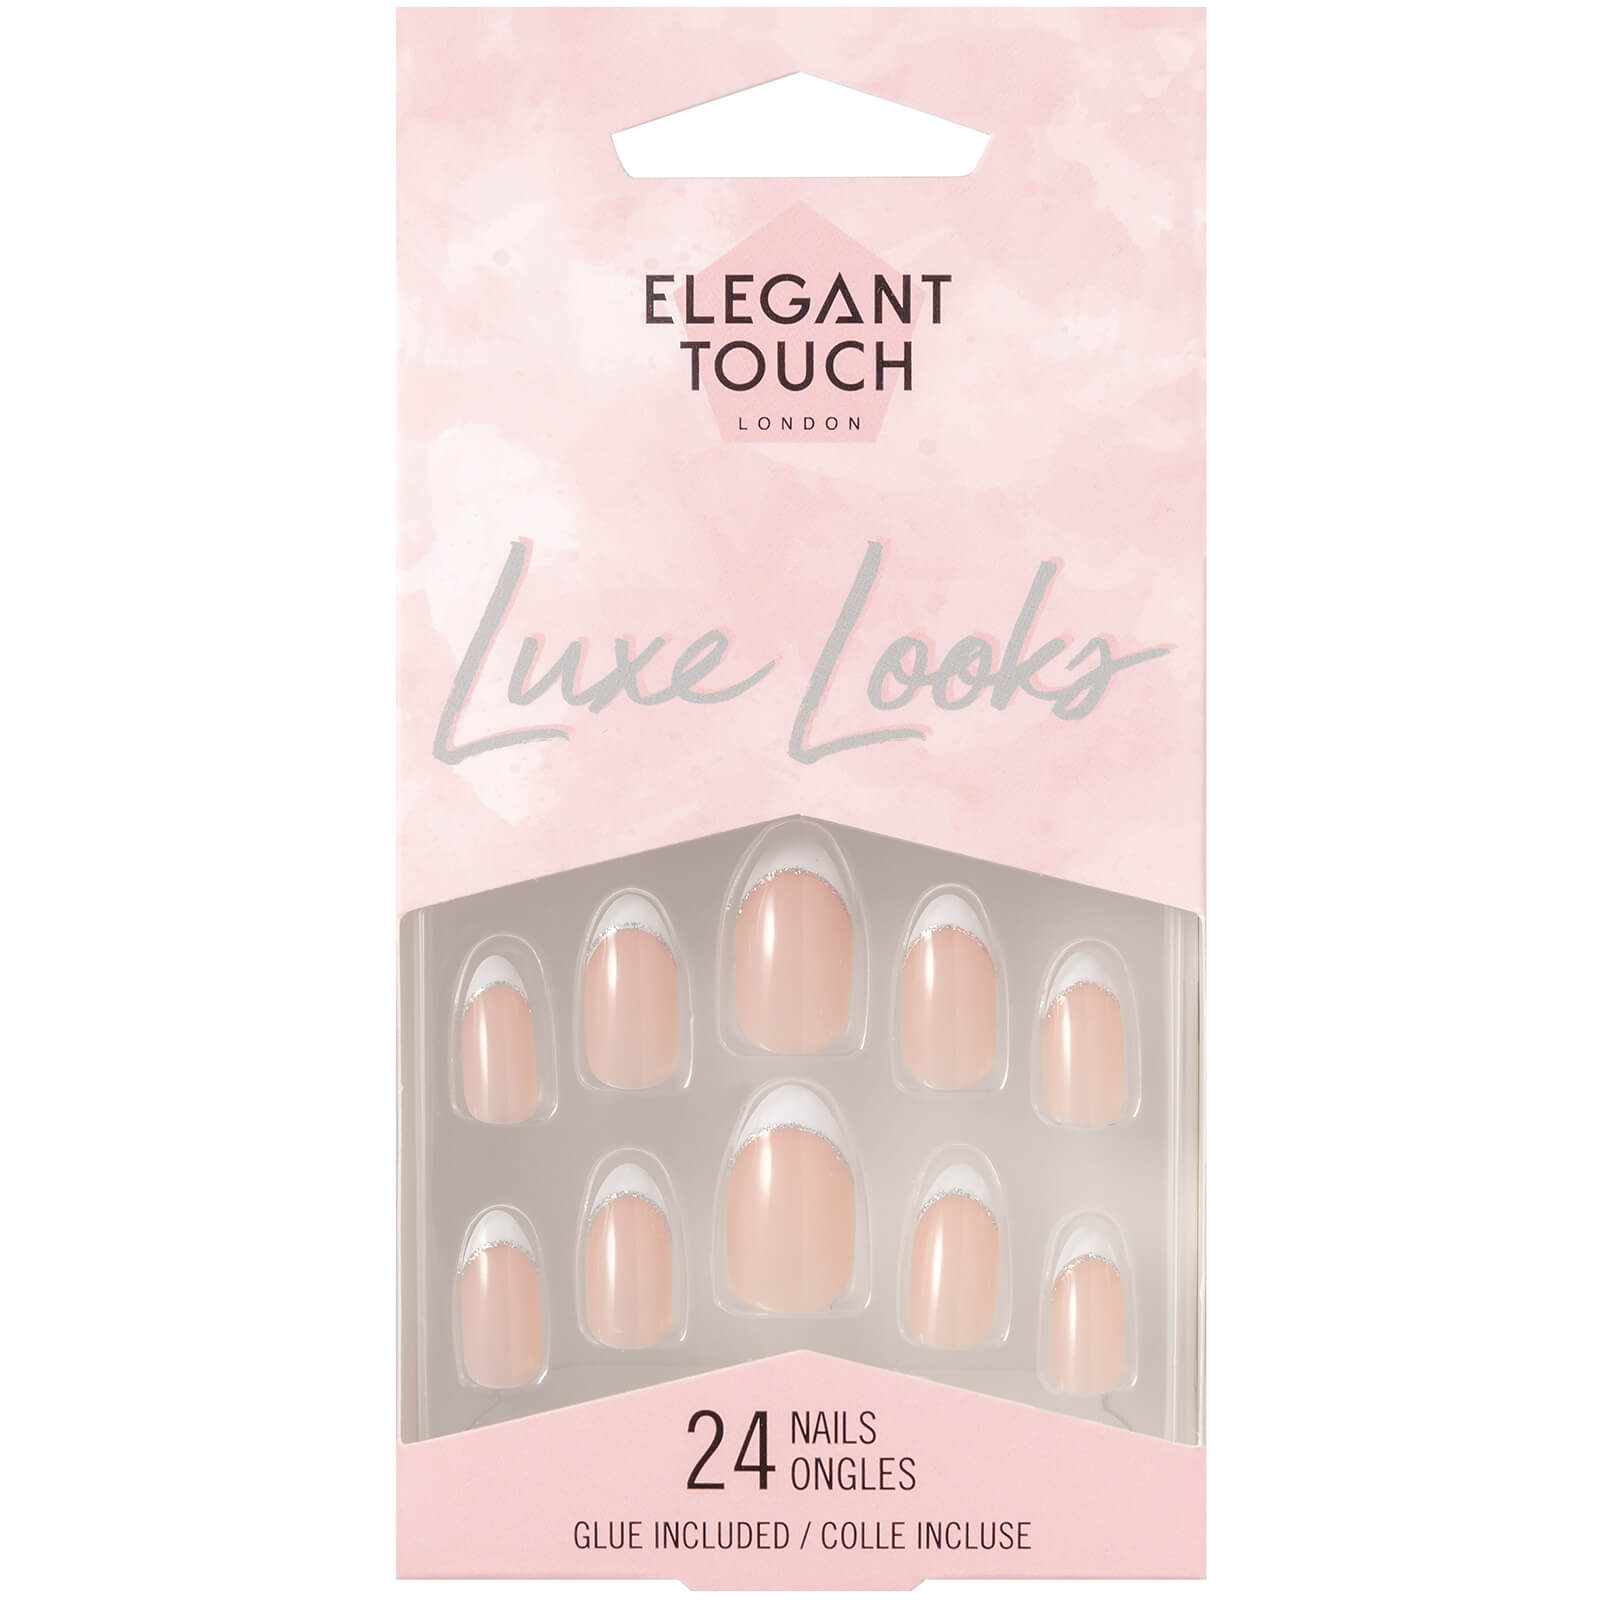 Image of Elegant Touch Luxe Looks False Nails - French Fancy You